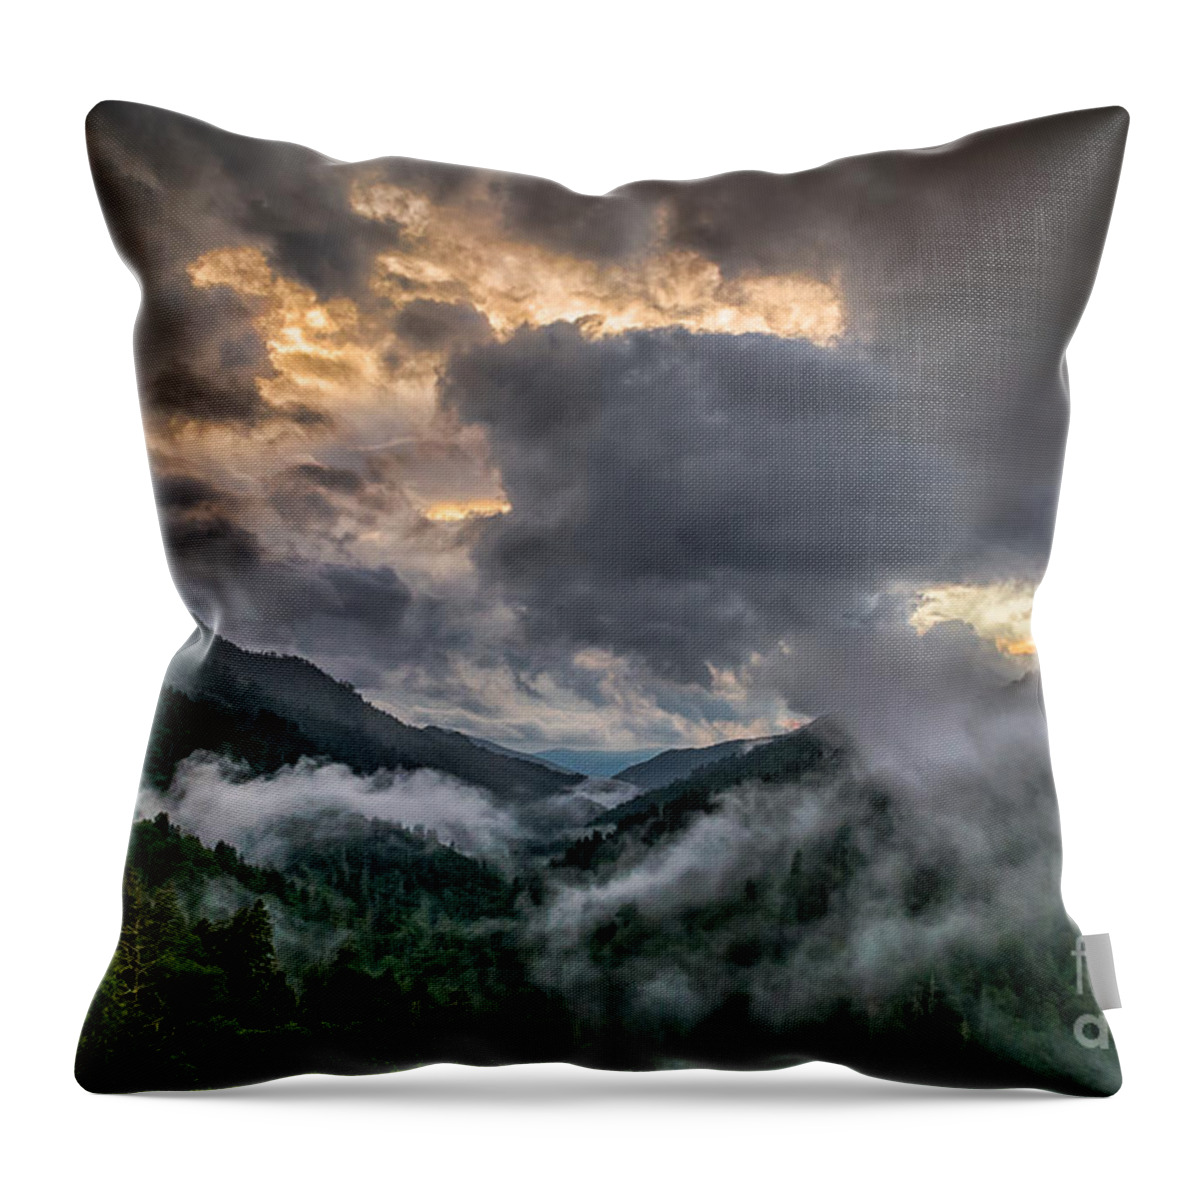 Sunset Throw Pillow featuring the photograph Smoky Sunset by Sophie Doell